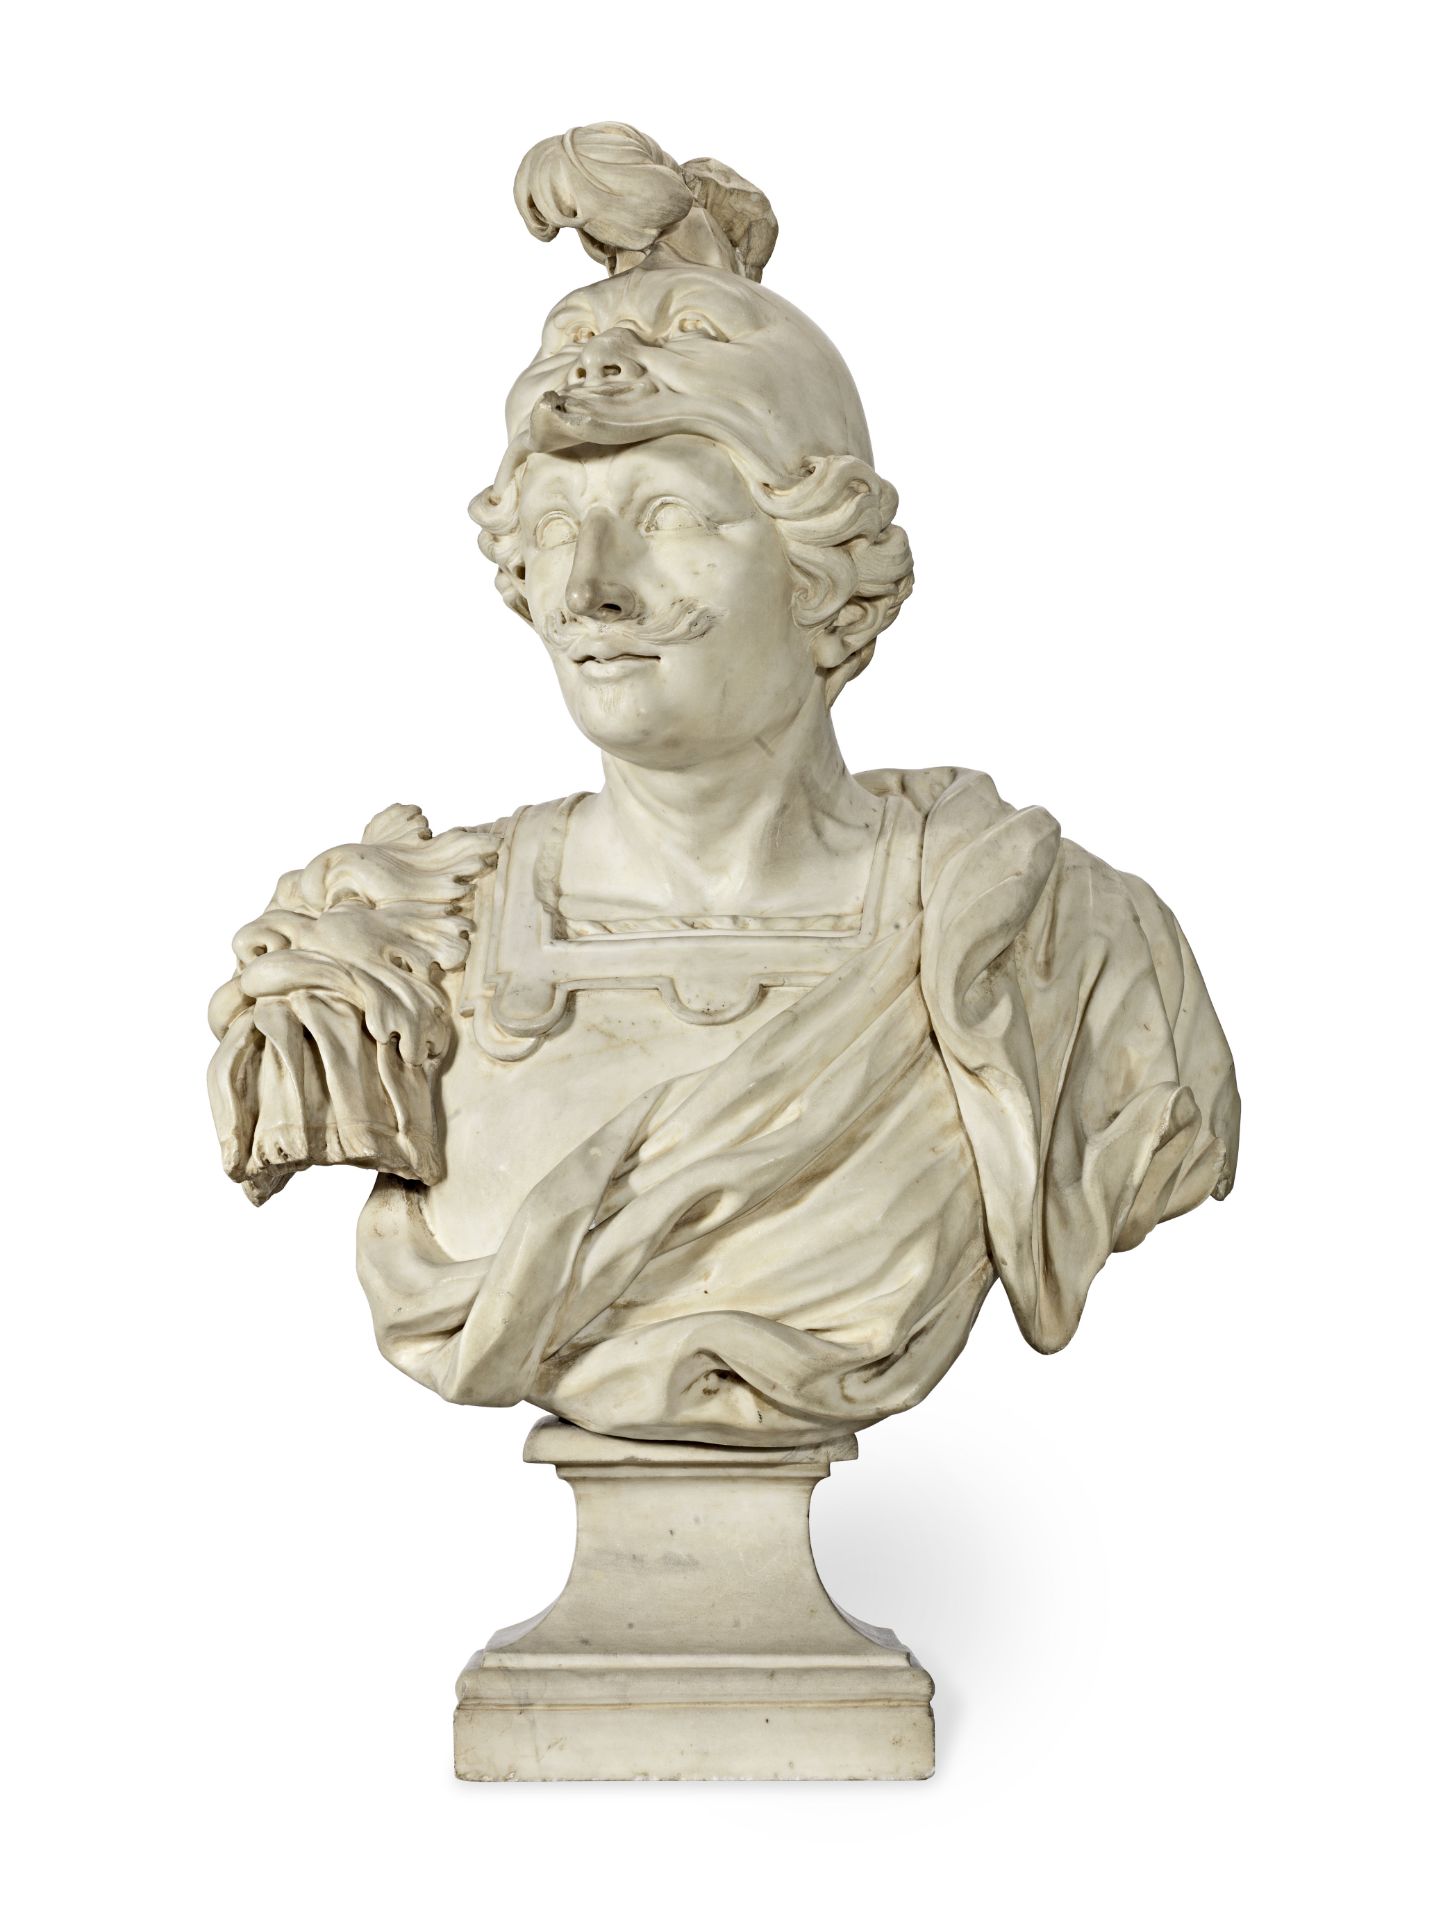 Italian School, early 18th century: A carved marble bust of Mars possibly attributable to Giovann...